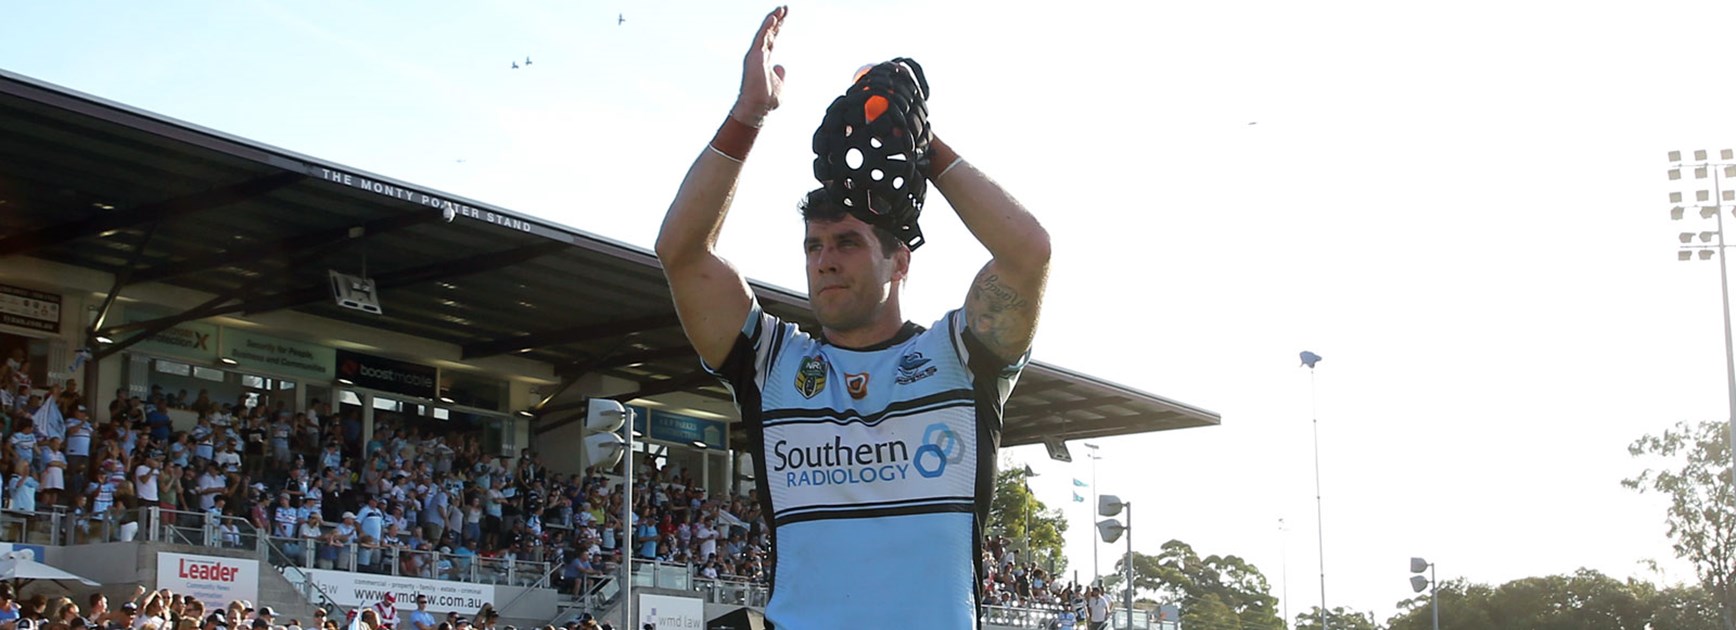 Michael Ennis has announced he will retire at the end of the 2016 season.